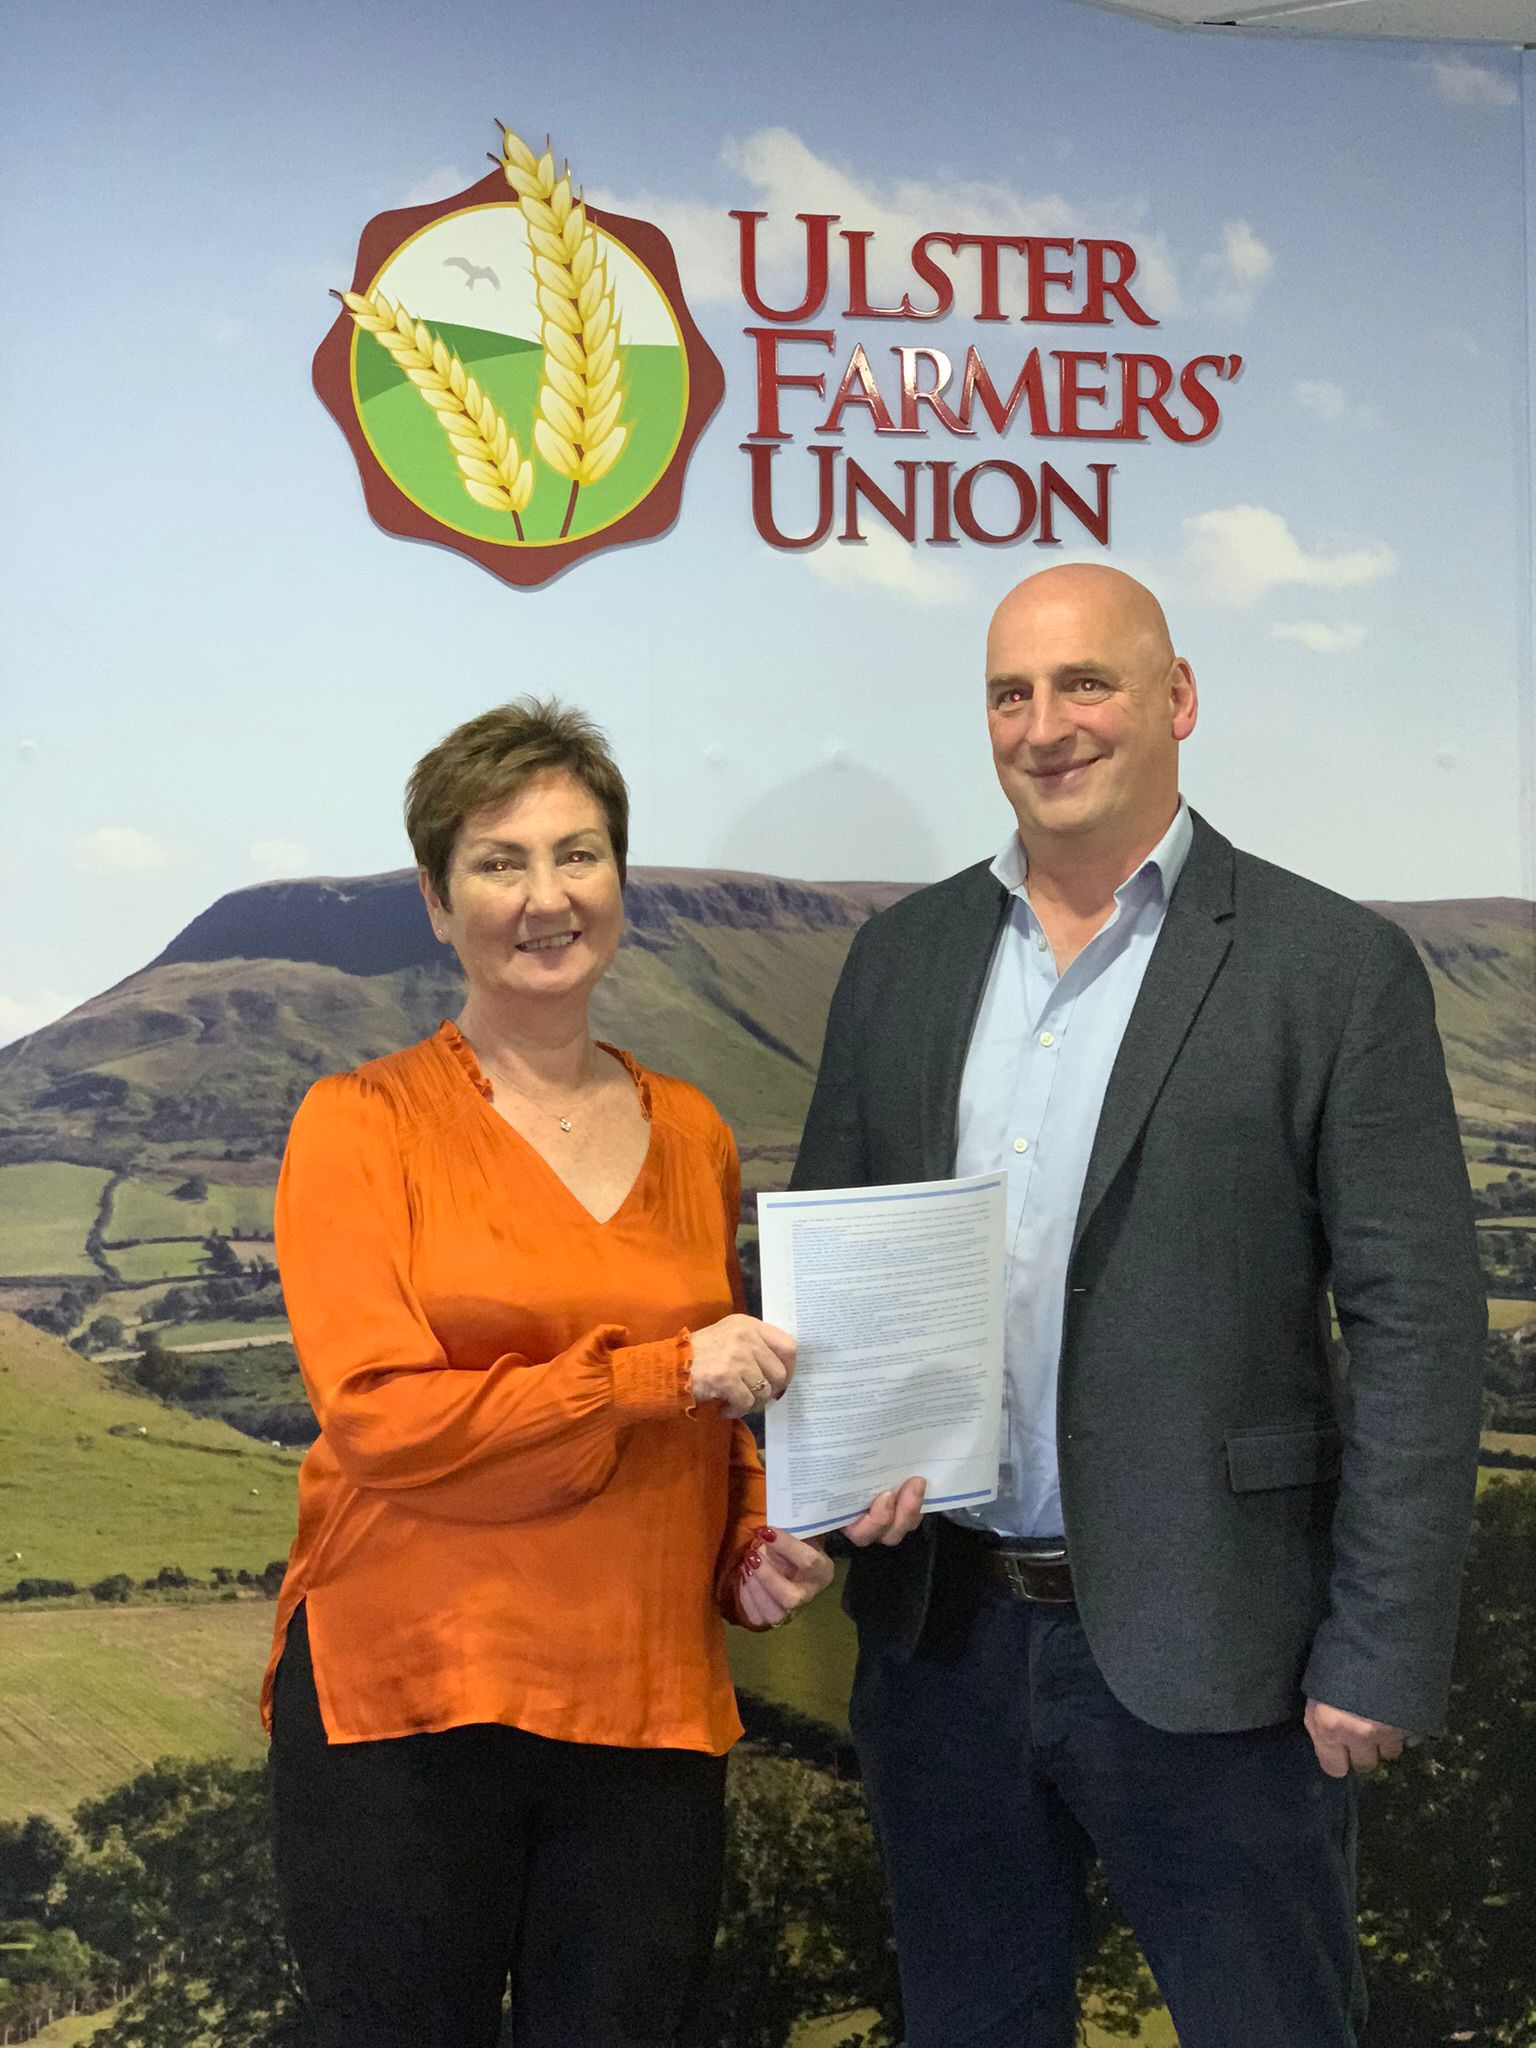 THE ELECTRIC STORAGE COMPANY LAUNCH AFFINITY DEAL WITH ULTSER FARMERS UNION